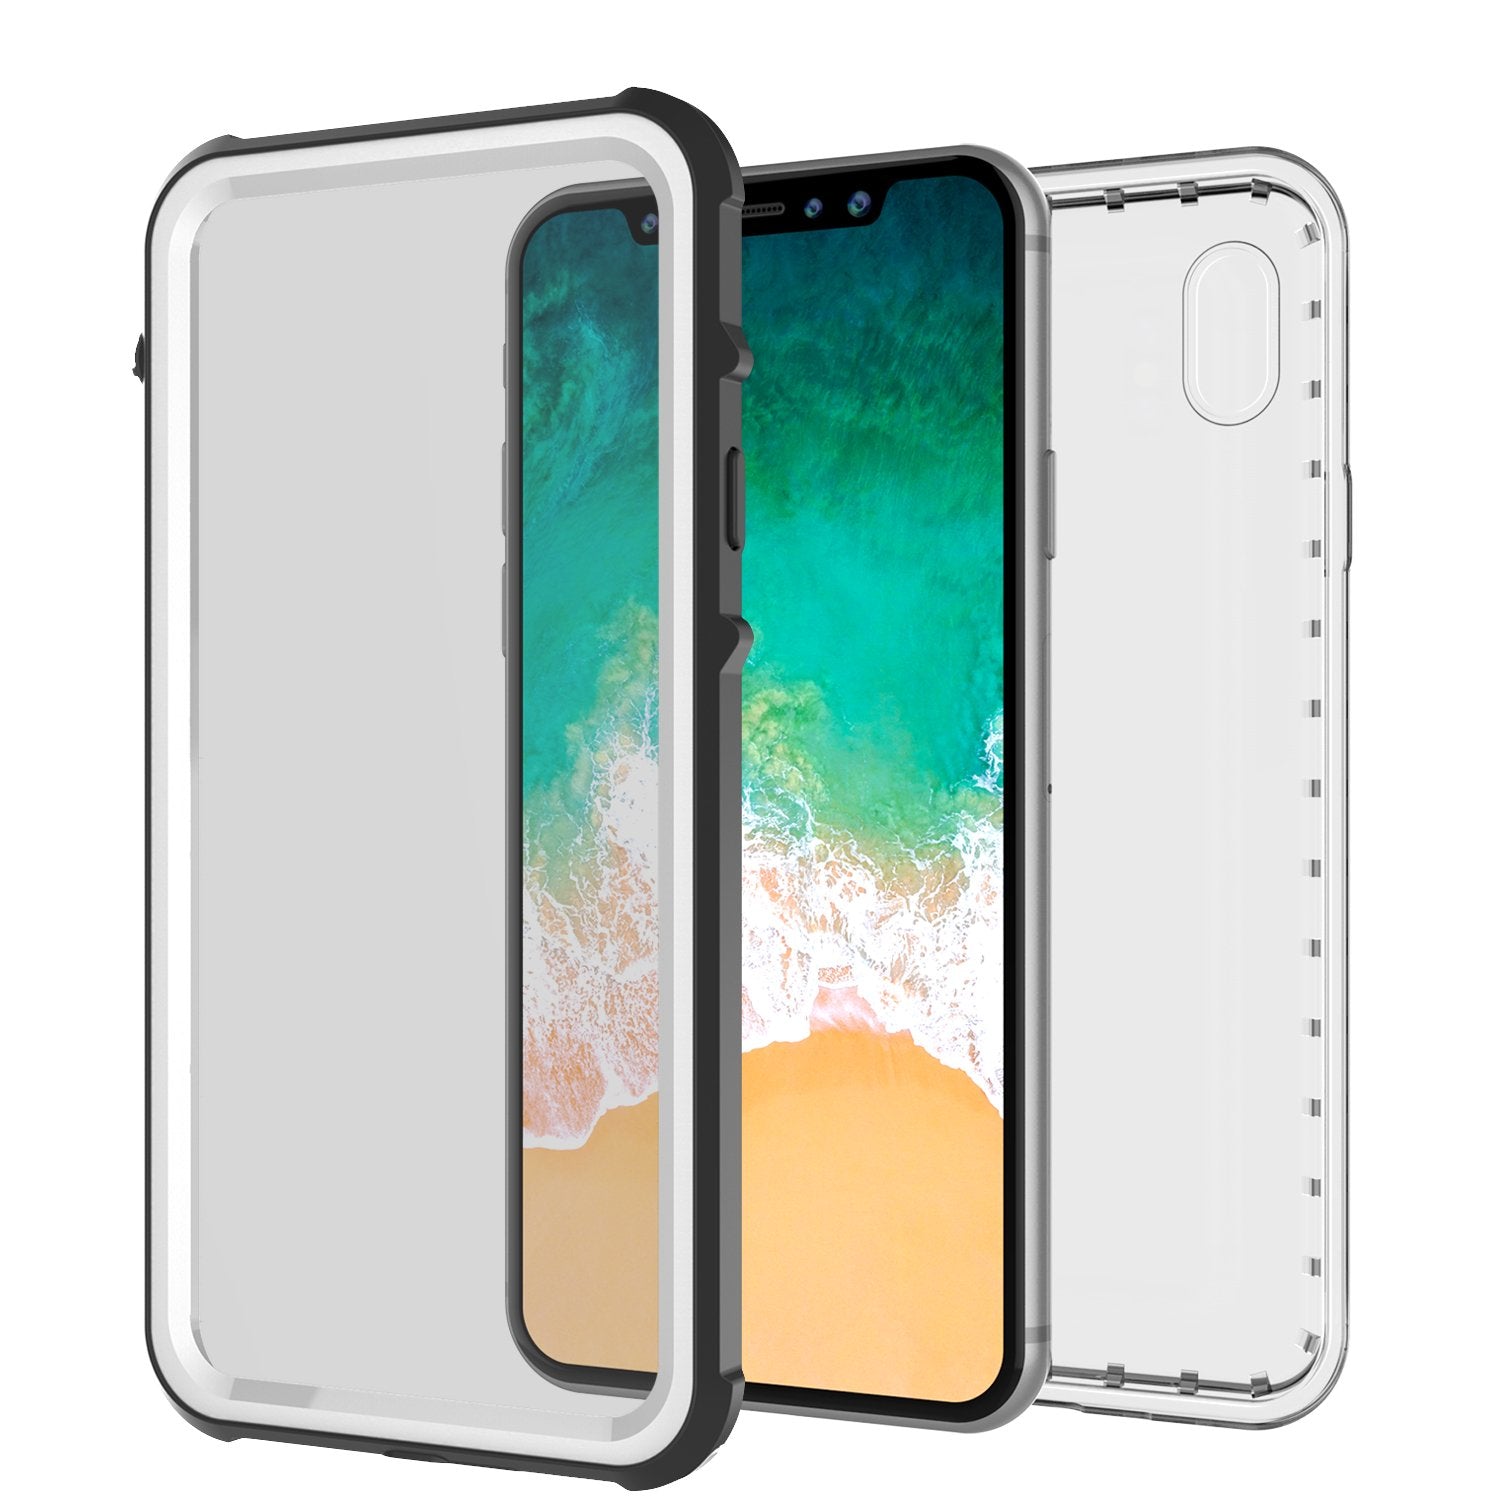 iPhone X Case, PUNKCase [CRYSTAL SERIES] Protective IP68 Certified Cover W/ Attached Screen Protector - DustPROOF, ShockPROOF, SnowPROOF - Ultra Slim Fit for Apple iPhone 10 [WHITE]